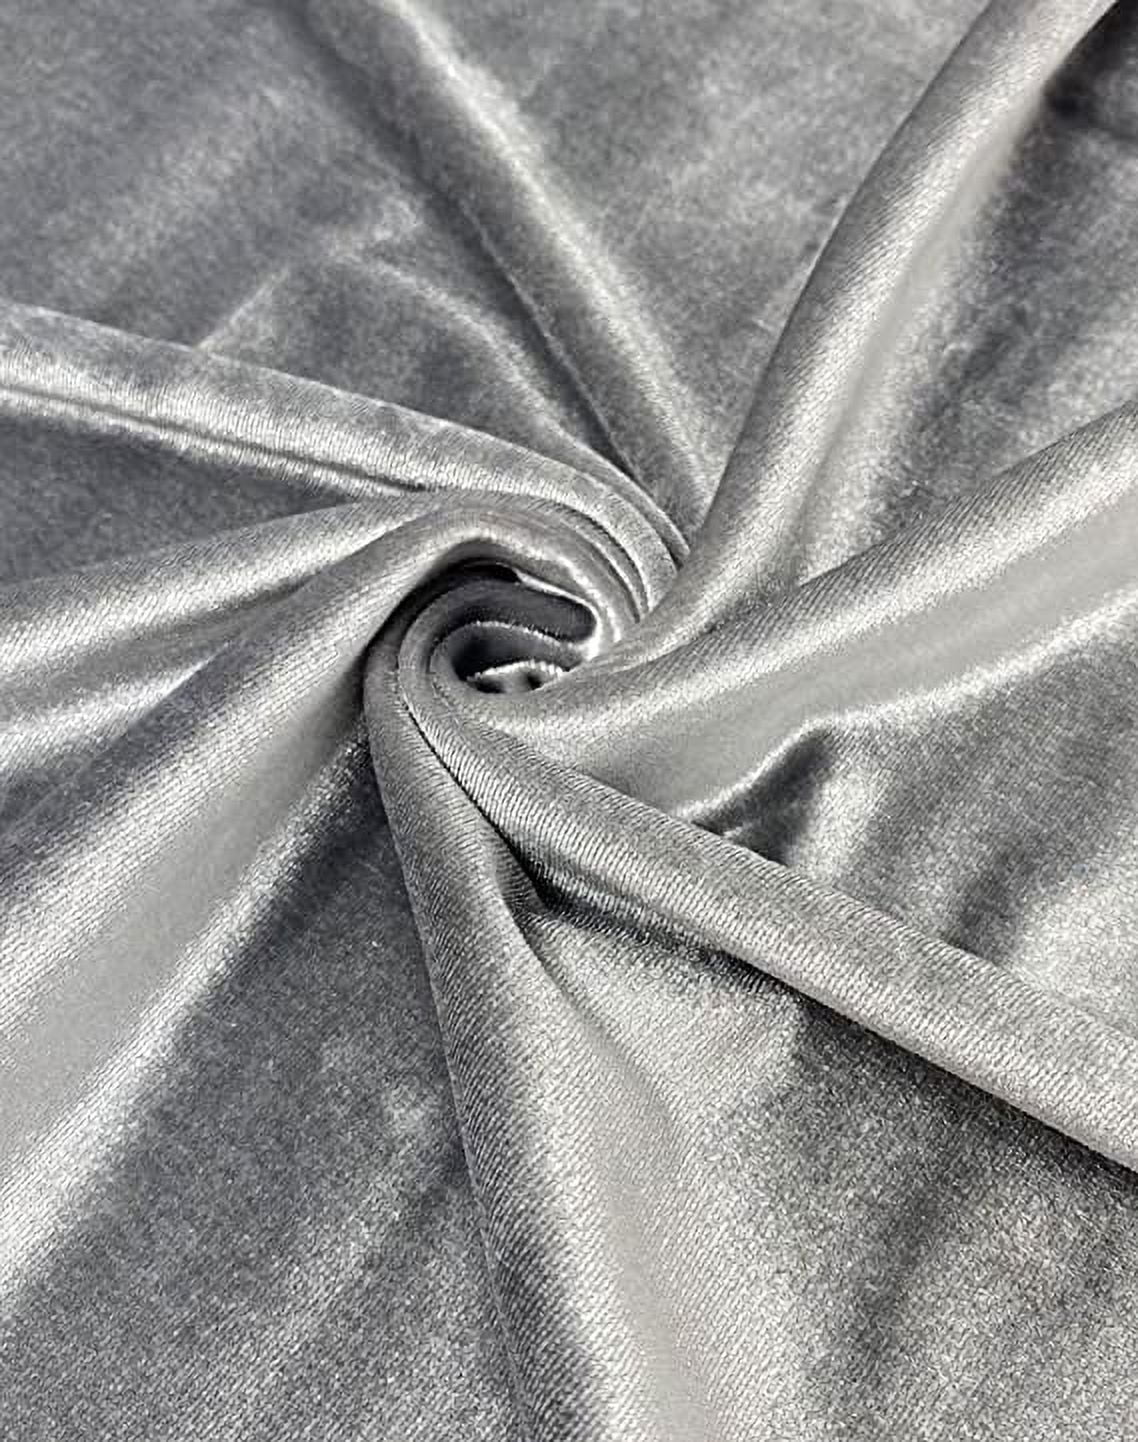 Stretch Velvet Fabric, 58-60 Wide / By The Yard in Many Colors - Free  Shipping